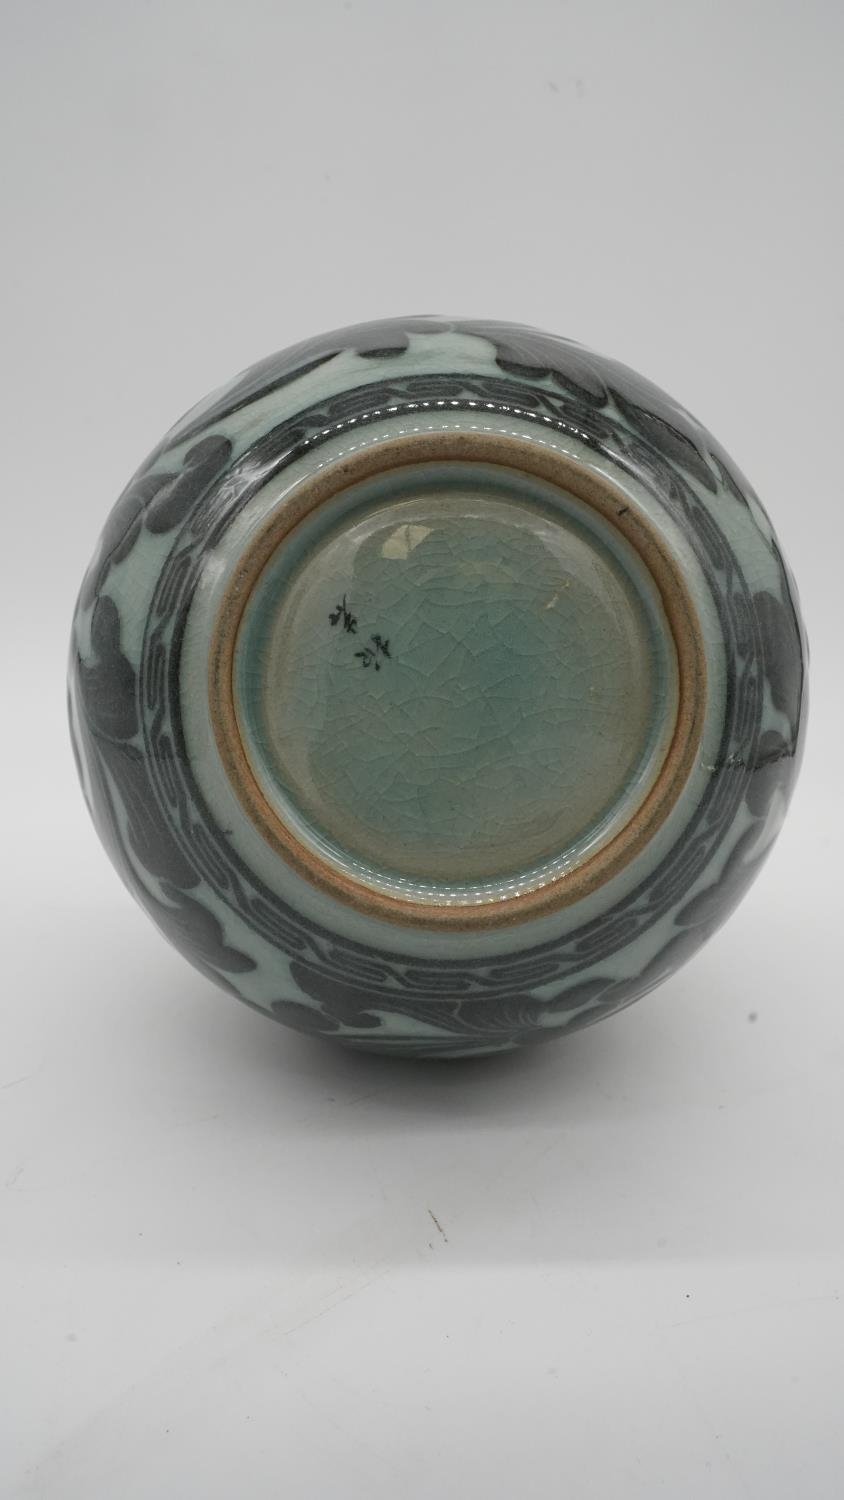 A 20th century Korean celadon glaze ceramic baluster vase with ruffled rim. Decorated with a - Image 3 of 4